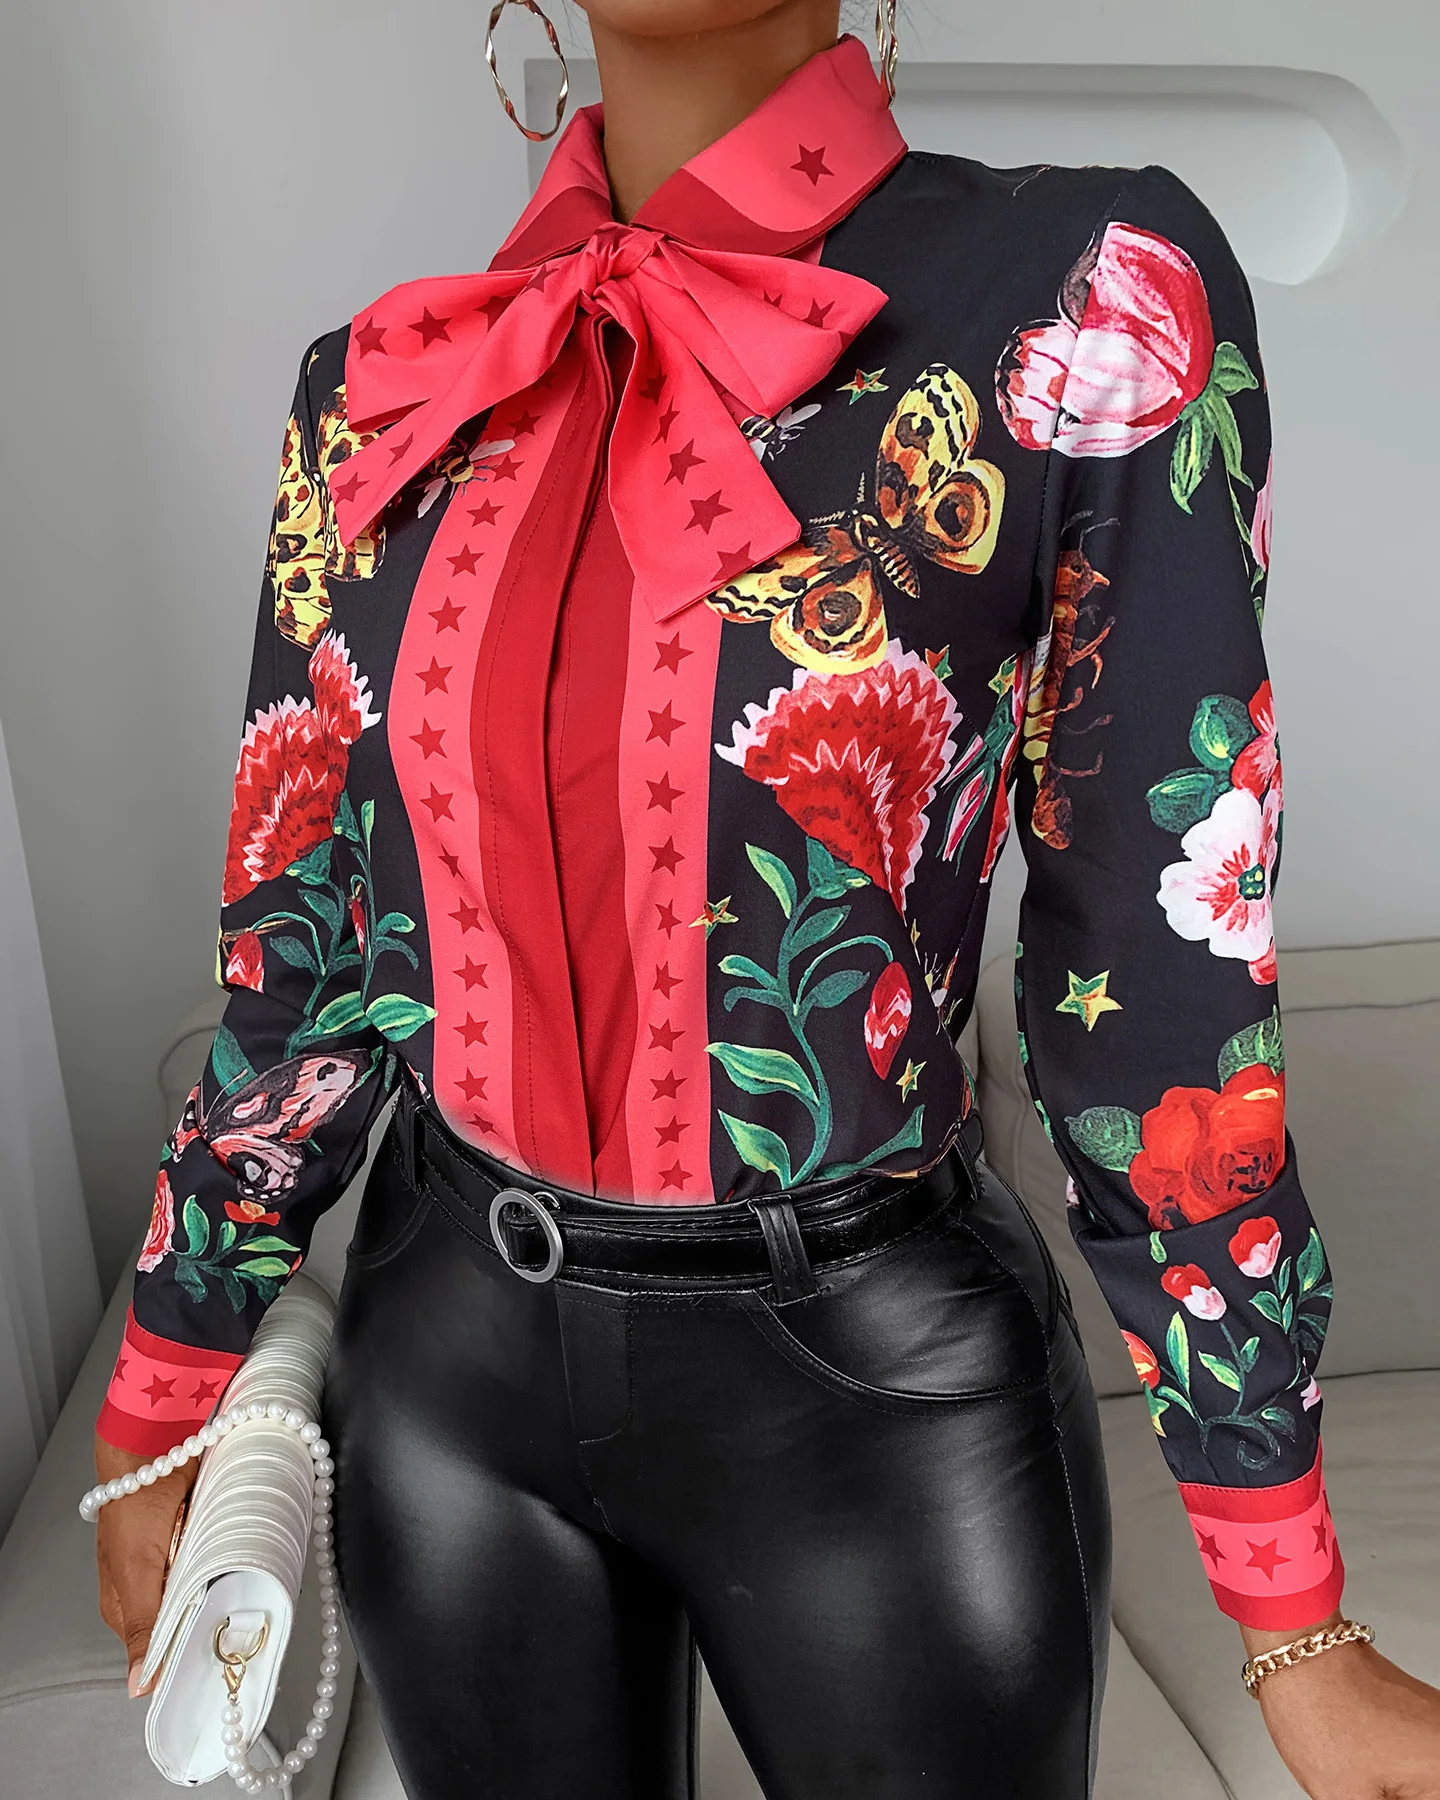 2020 Women Casual Autumn Turn-down Collar Chic Chiffon Blouse Tie Neck Floral Butterfly Print Long Sleeve Blouse Ladies Shirt womens shirts Blouses & Shirts